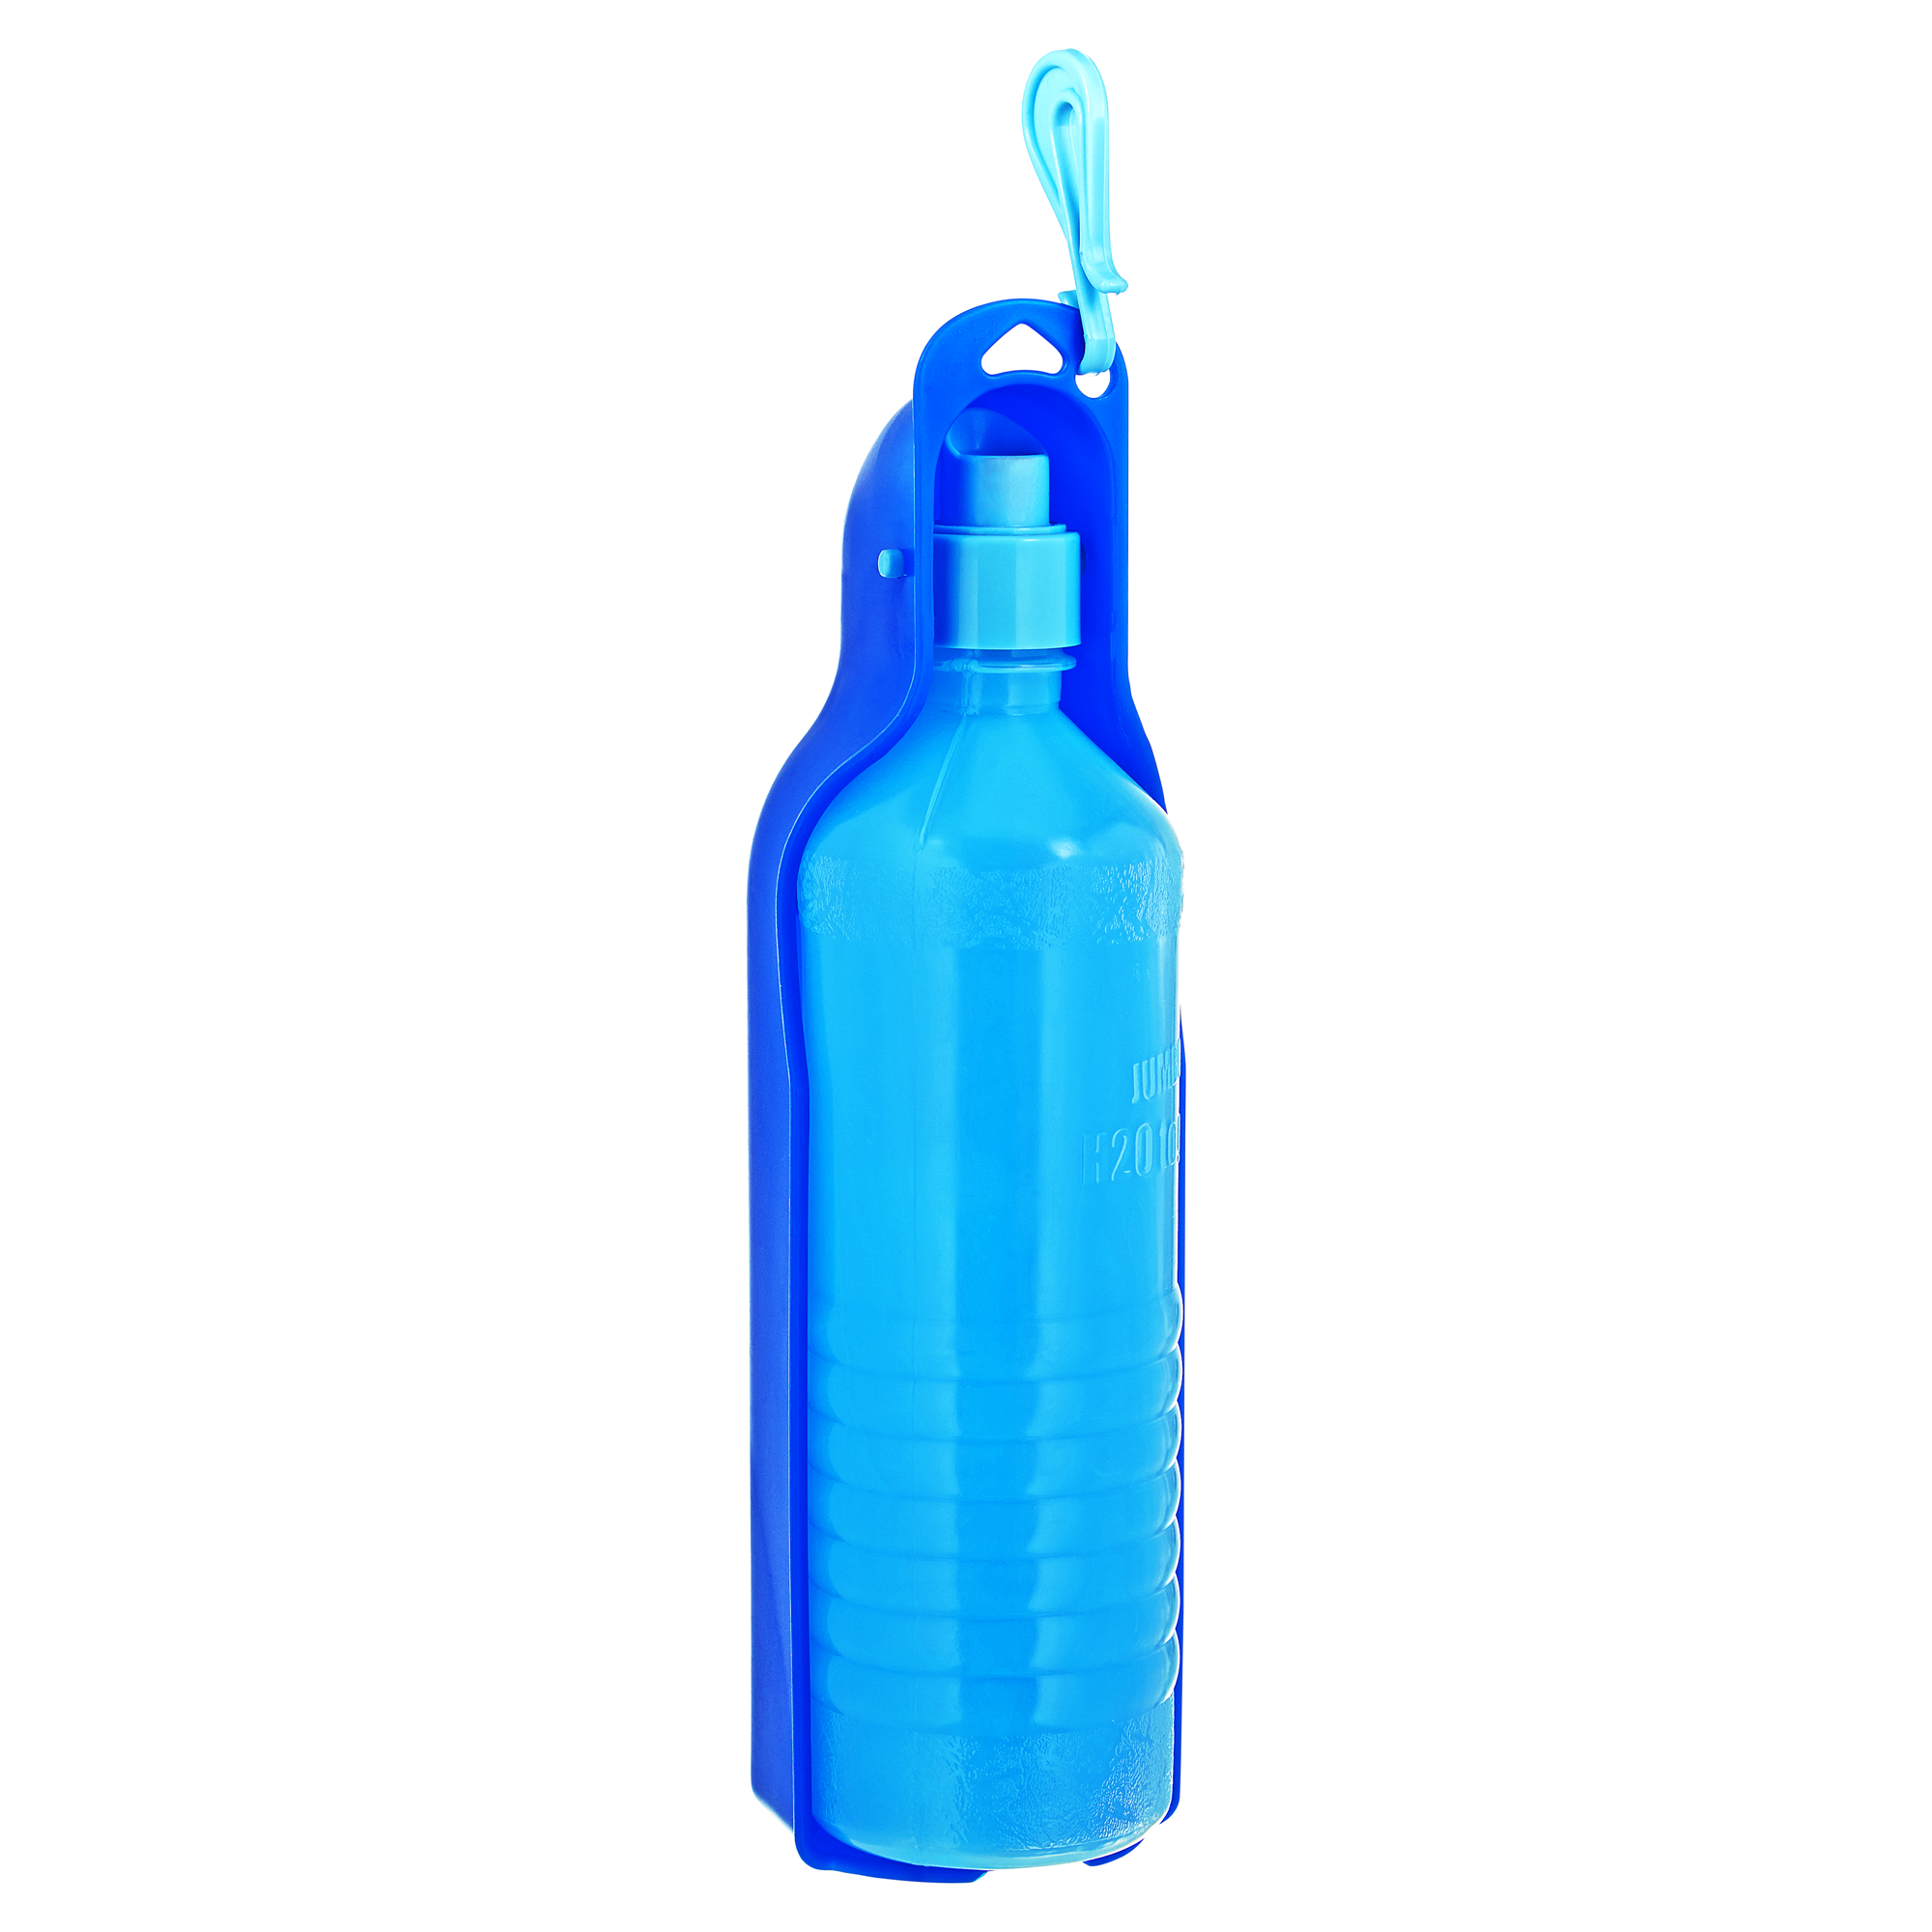 Tragbarer Wasserspender "H2O to go" 0,75 l + product picture